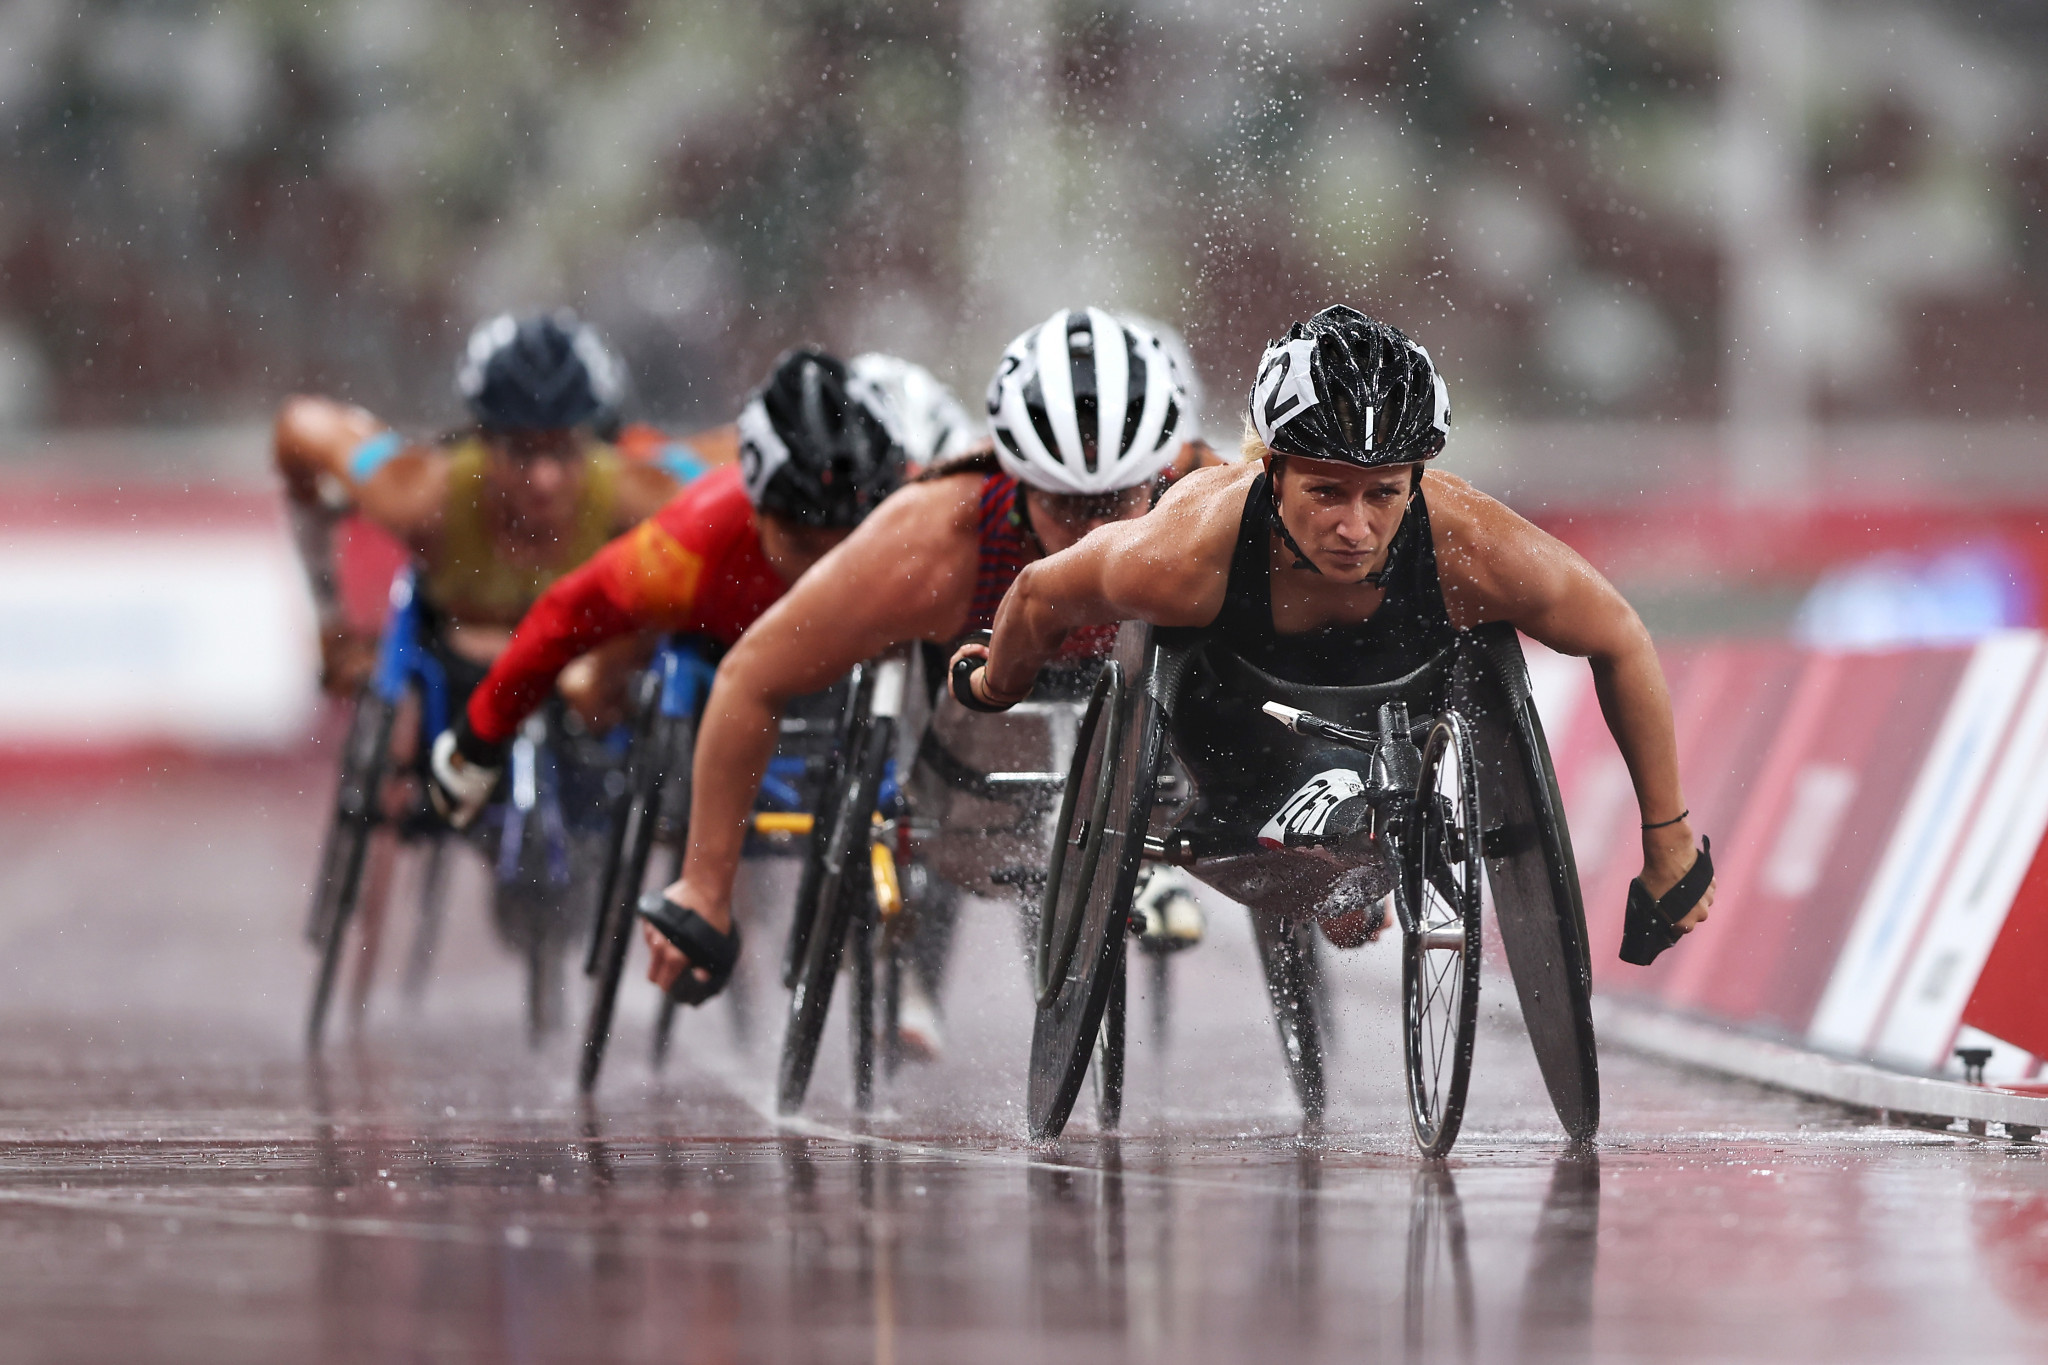 Athletes had to combat tough conditions at the Tokyo Olympic Stadium as a rainstorm hit Japan's capital city ©Getty Images